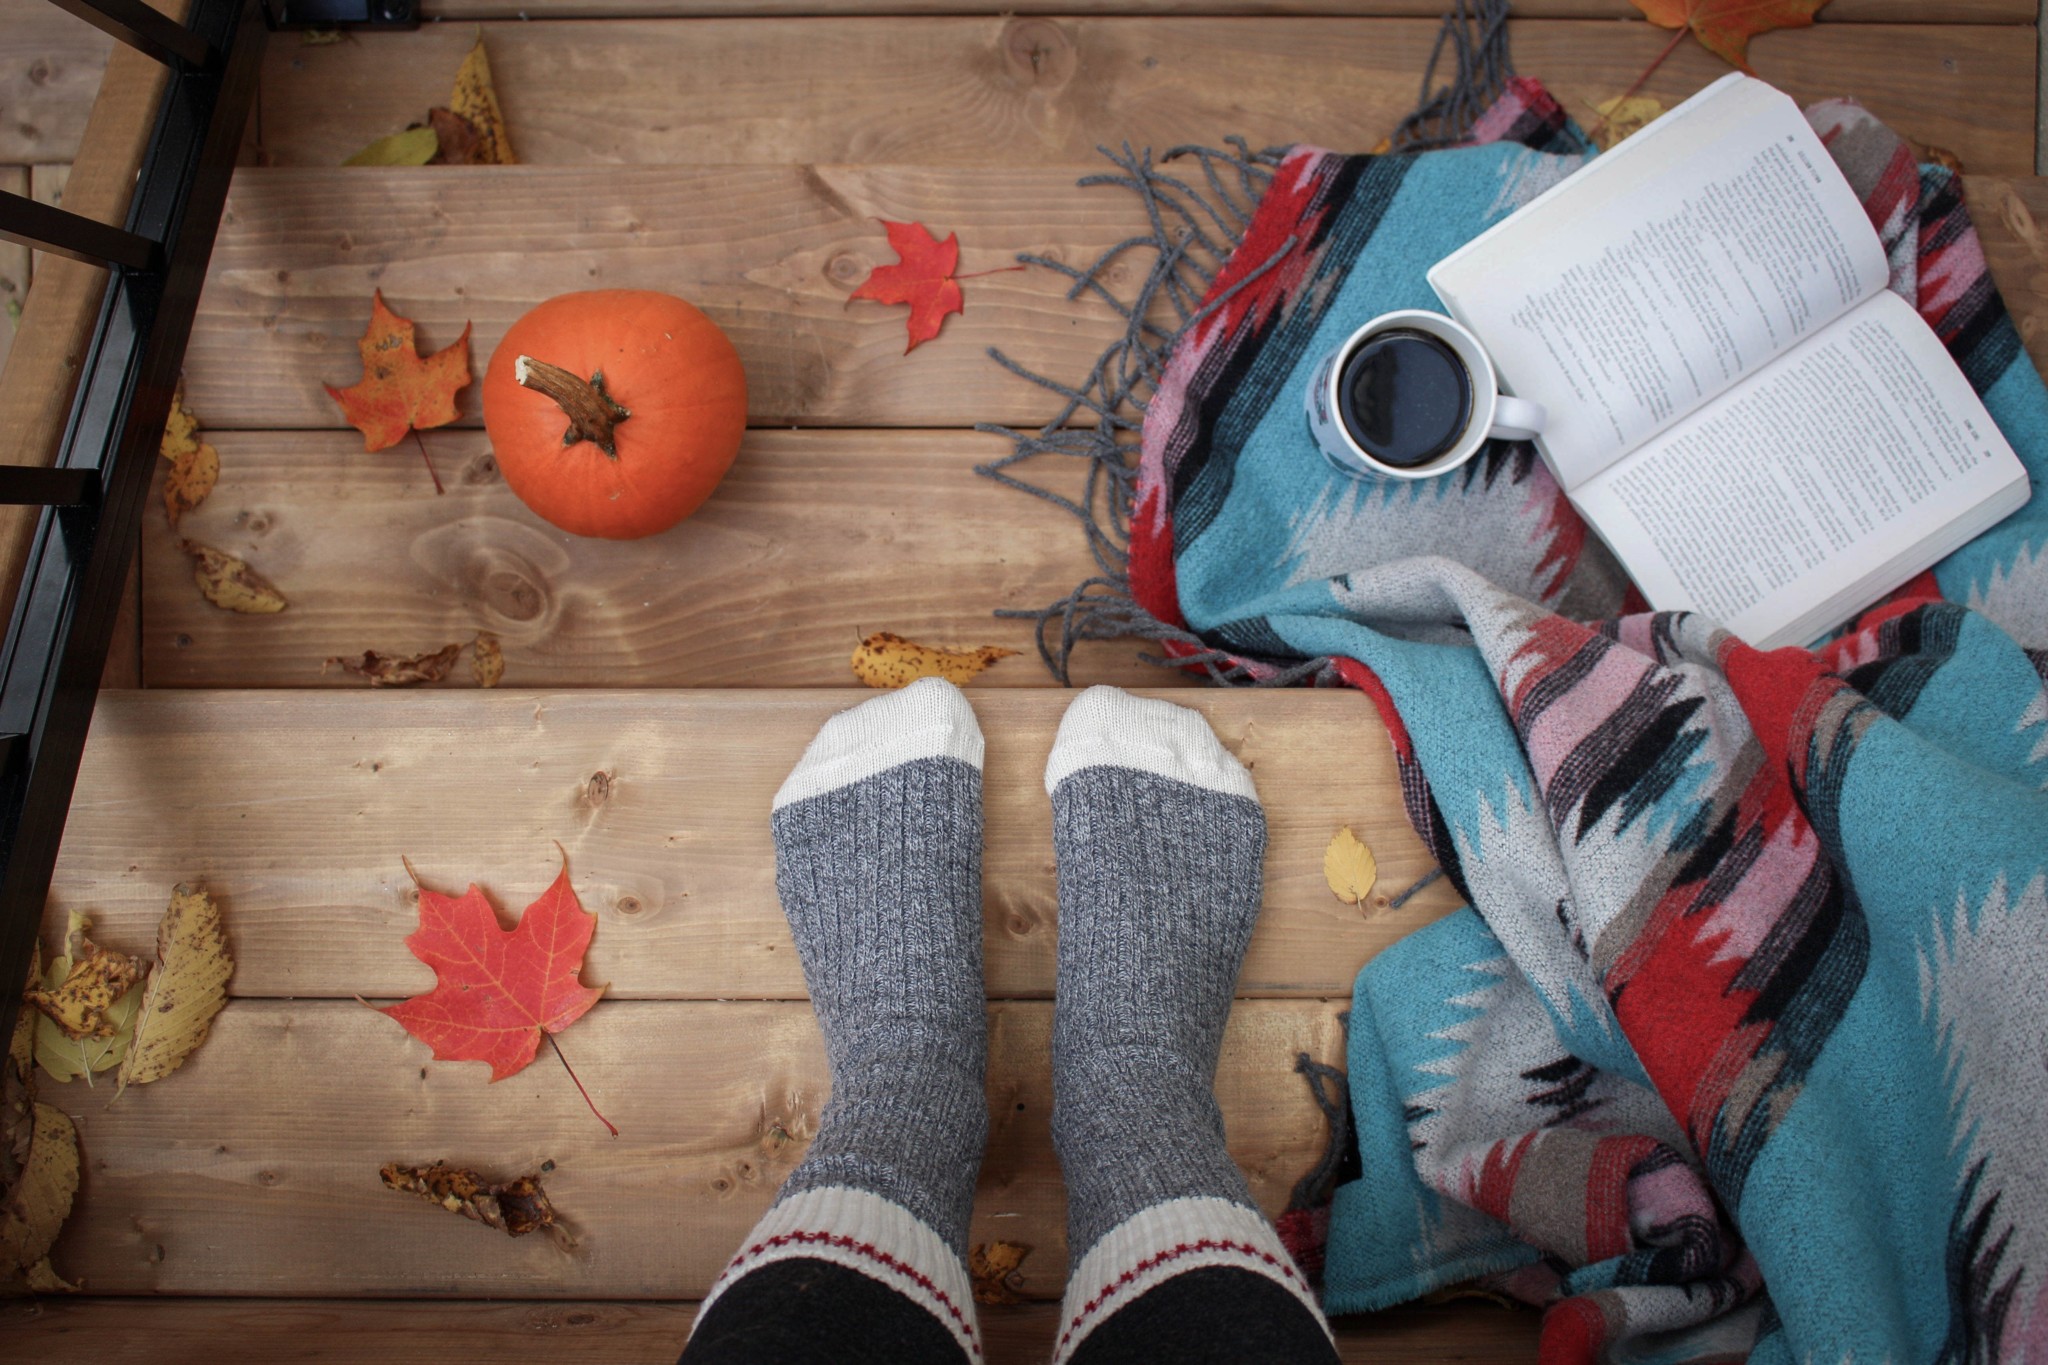 Practicing self-care in the fall with warm socks, a book, coffee, blanket, pumpkins and leaves.